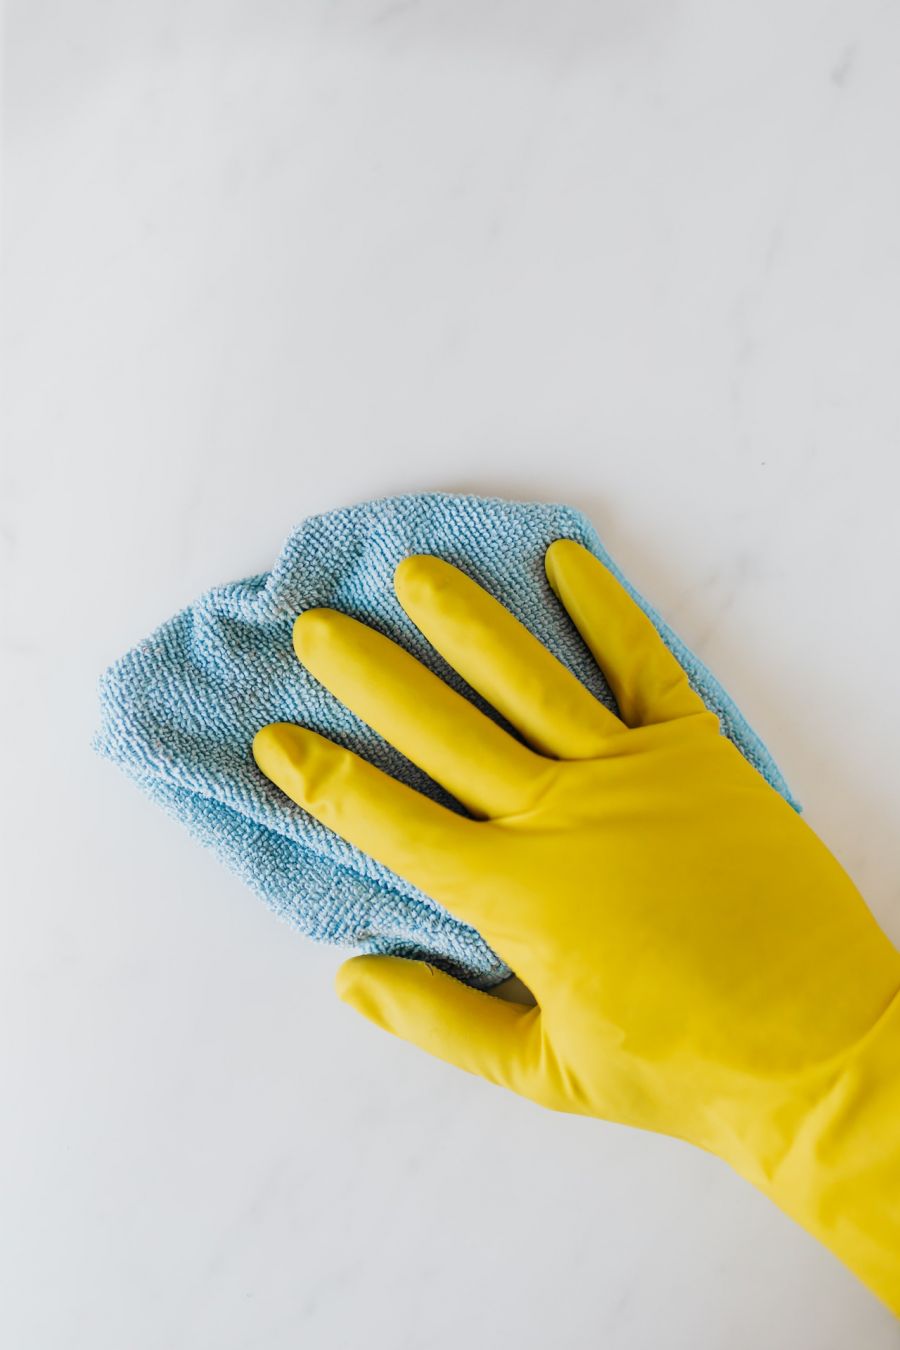 photo of cleaning hard surface